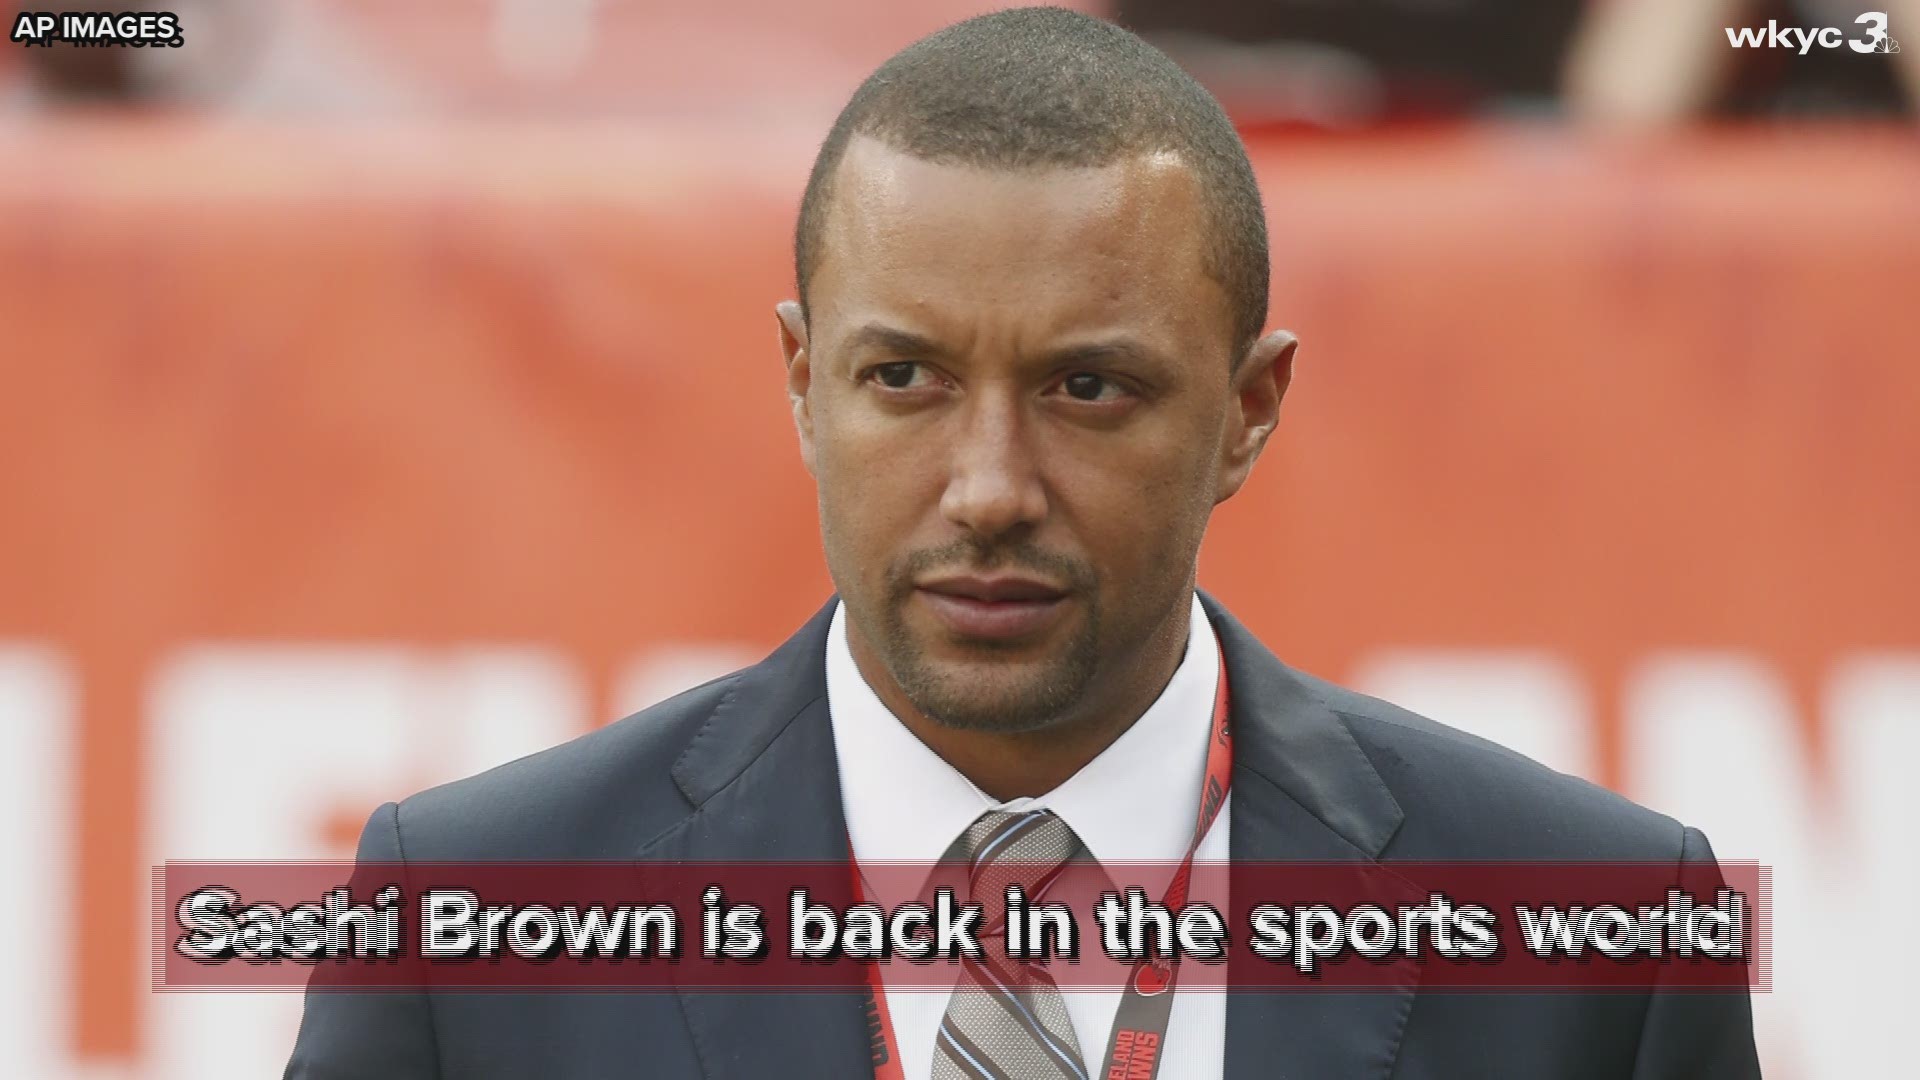 Former Cleveland Browns executive Sashi Brown has joined the front-office staff of the Washington Wizards.